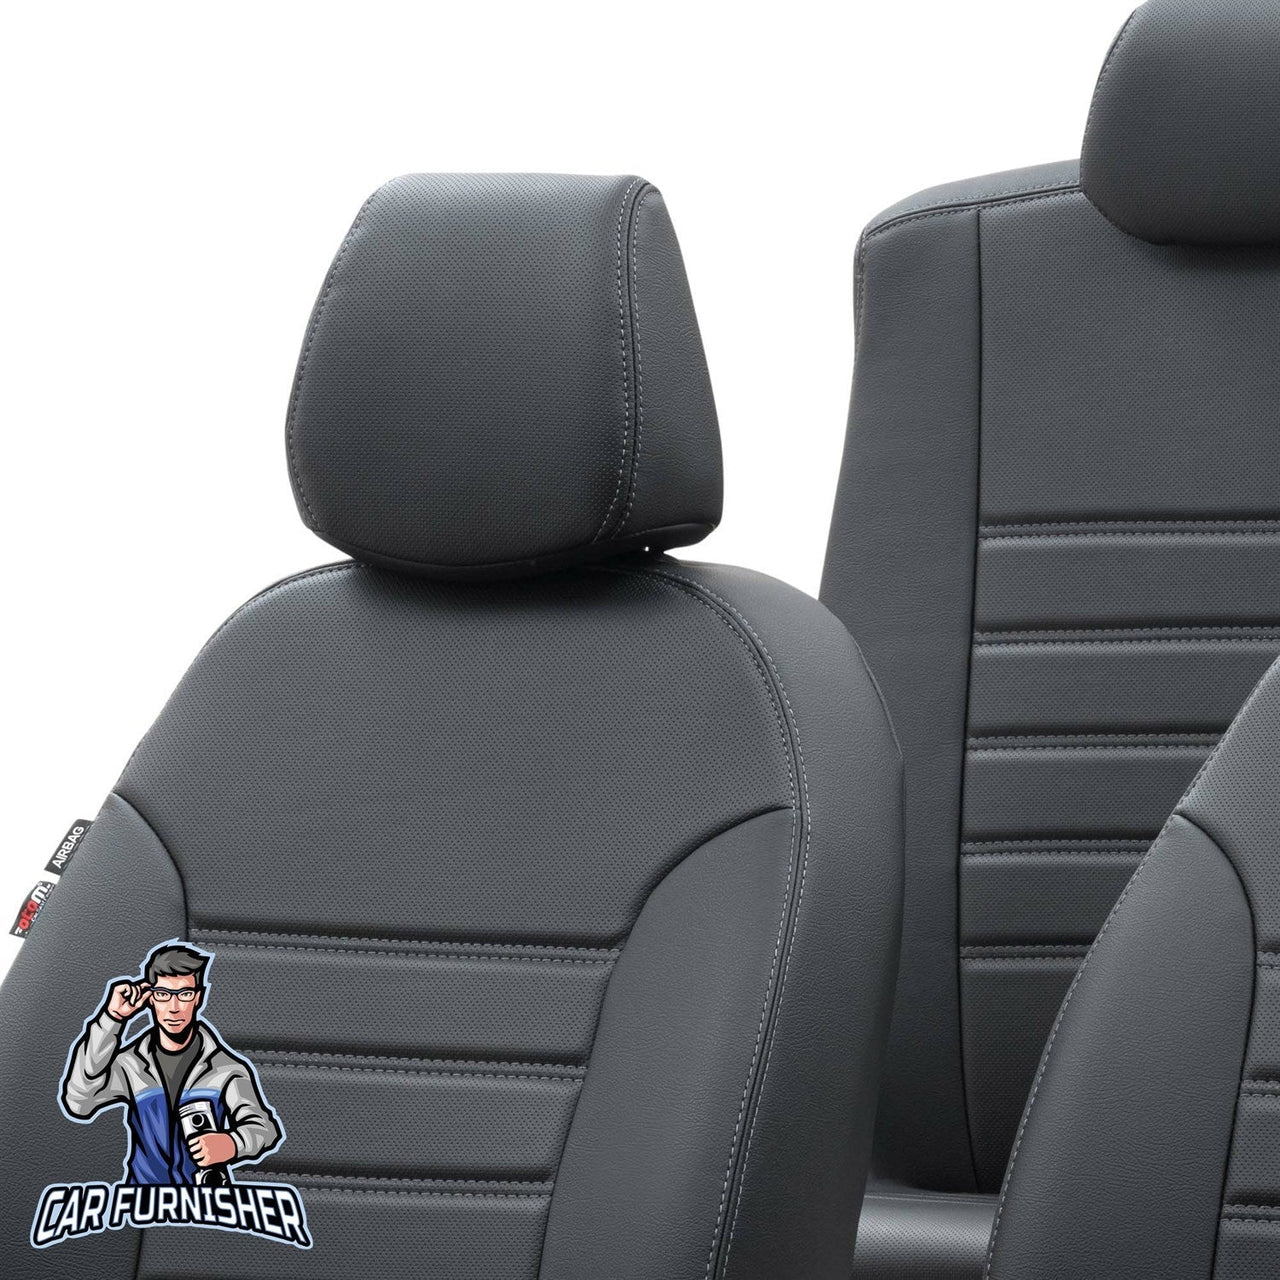 Man TGS Seat Cover Istanbul Leather Design Black Front Seats (2 Seats + Handrest + Headrests) Leather